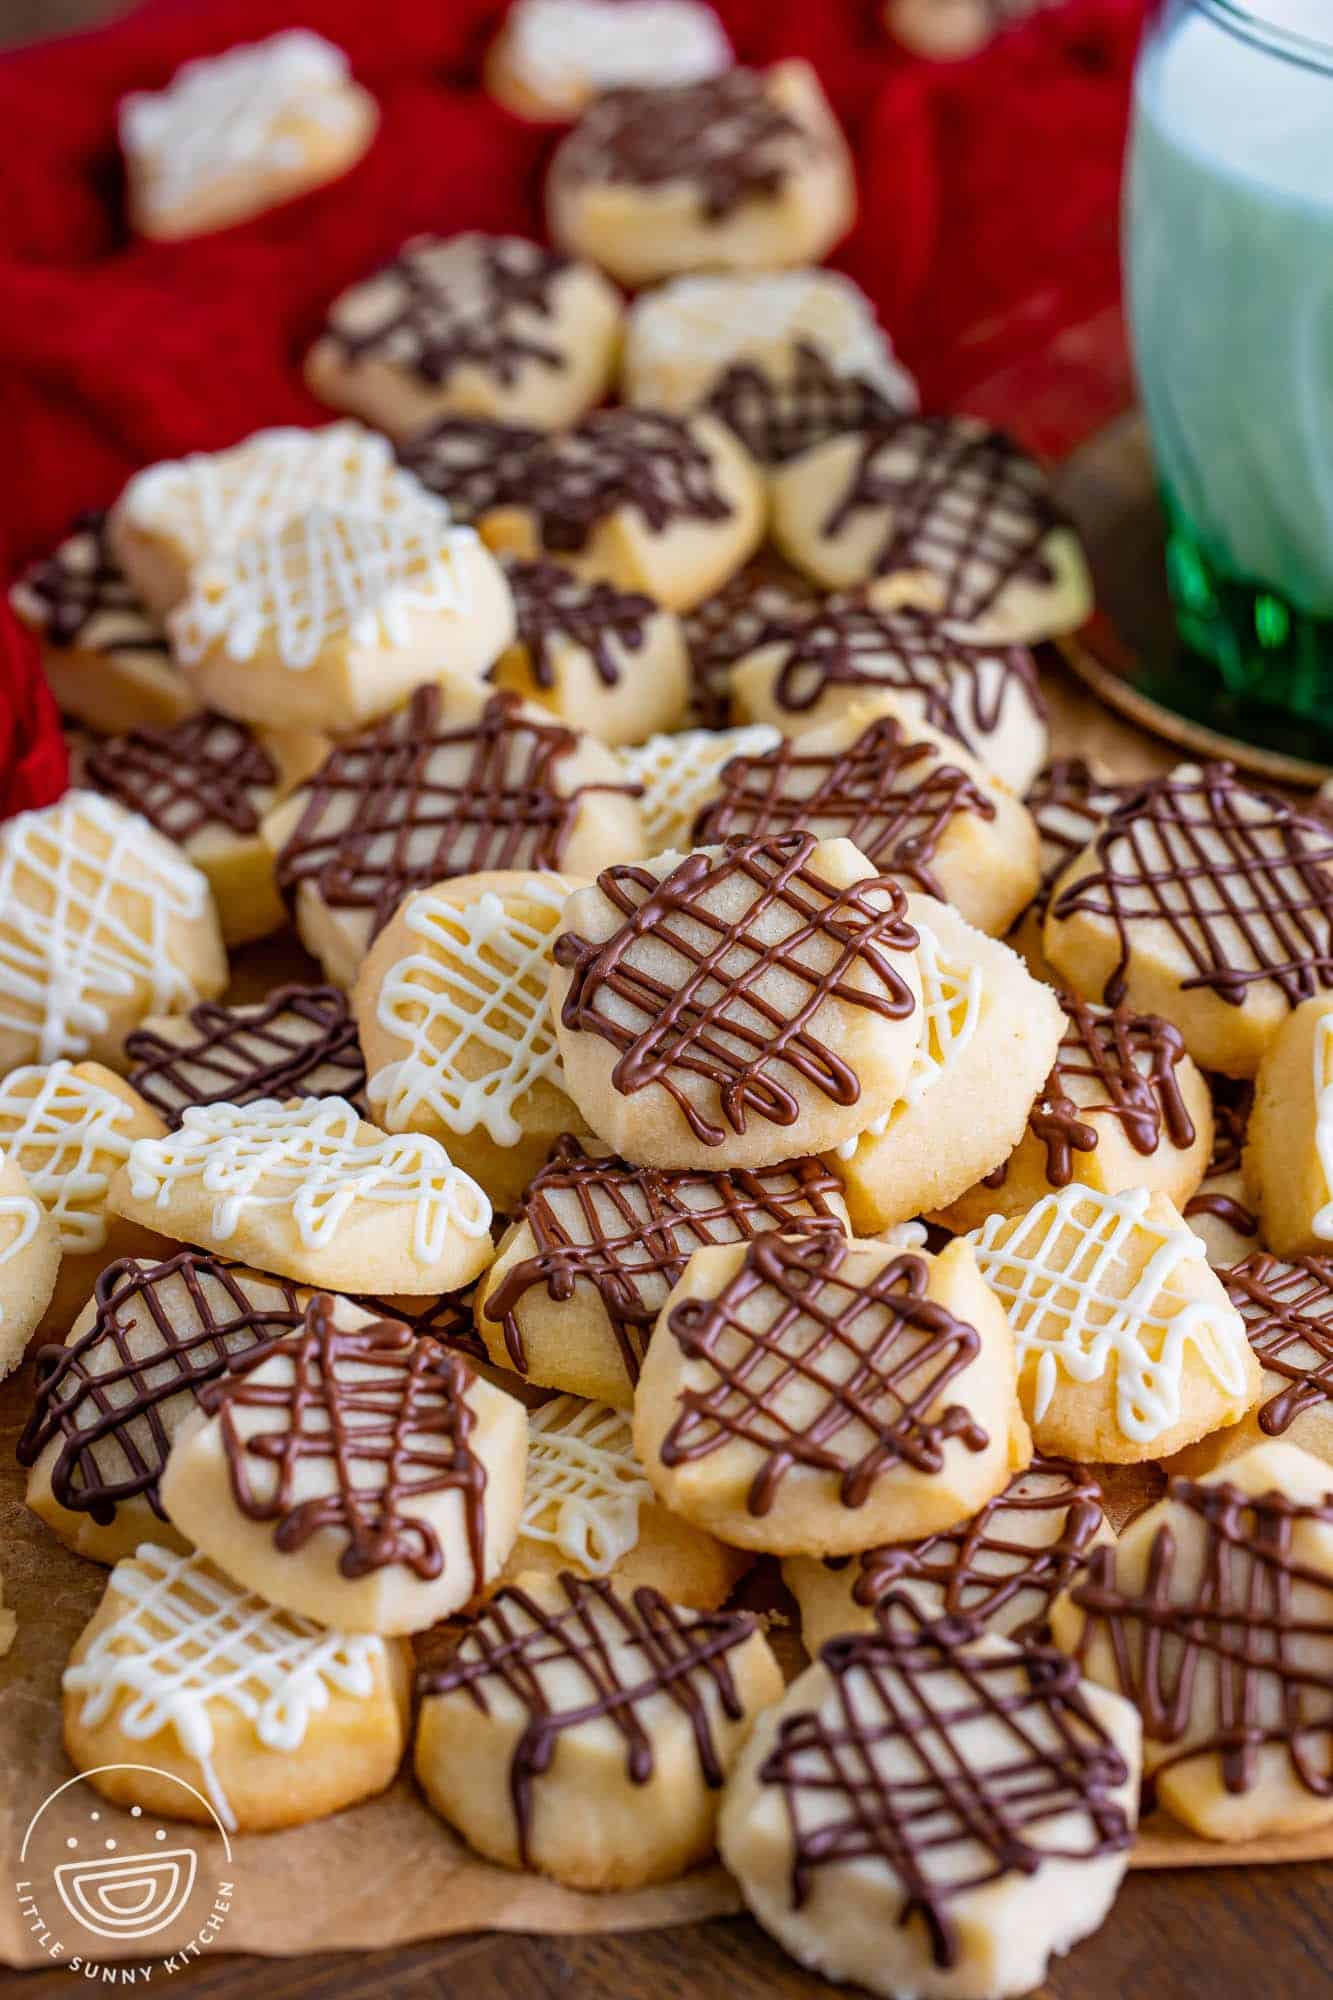 a pile of chocolate drizzled shortbread bites on a red tablecloth.